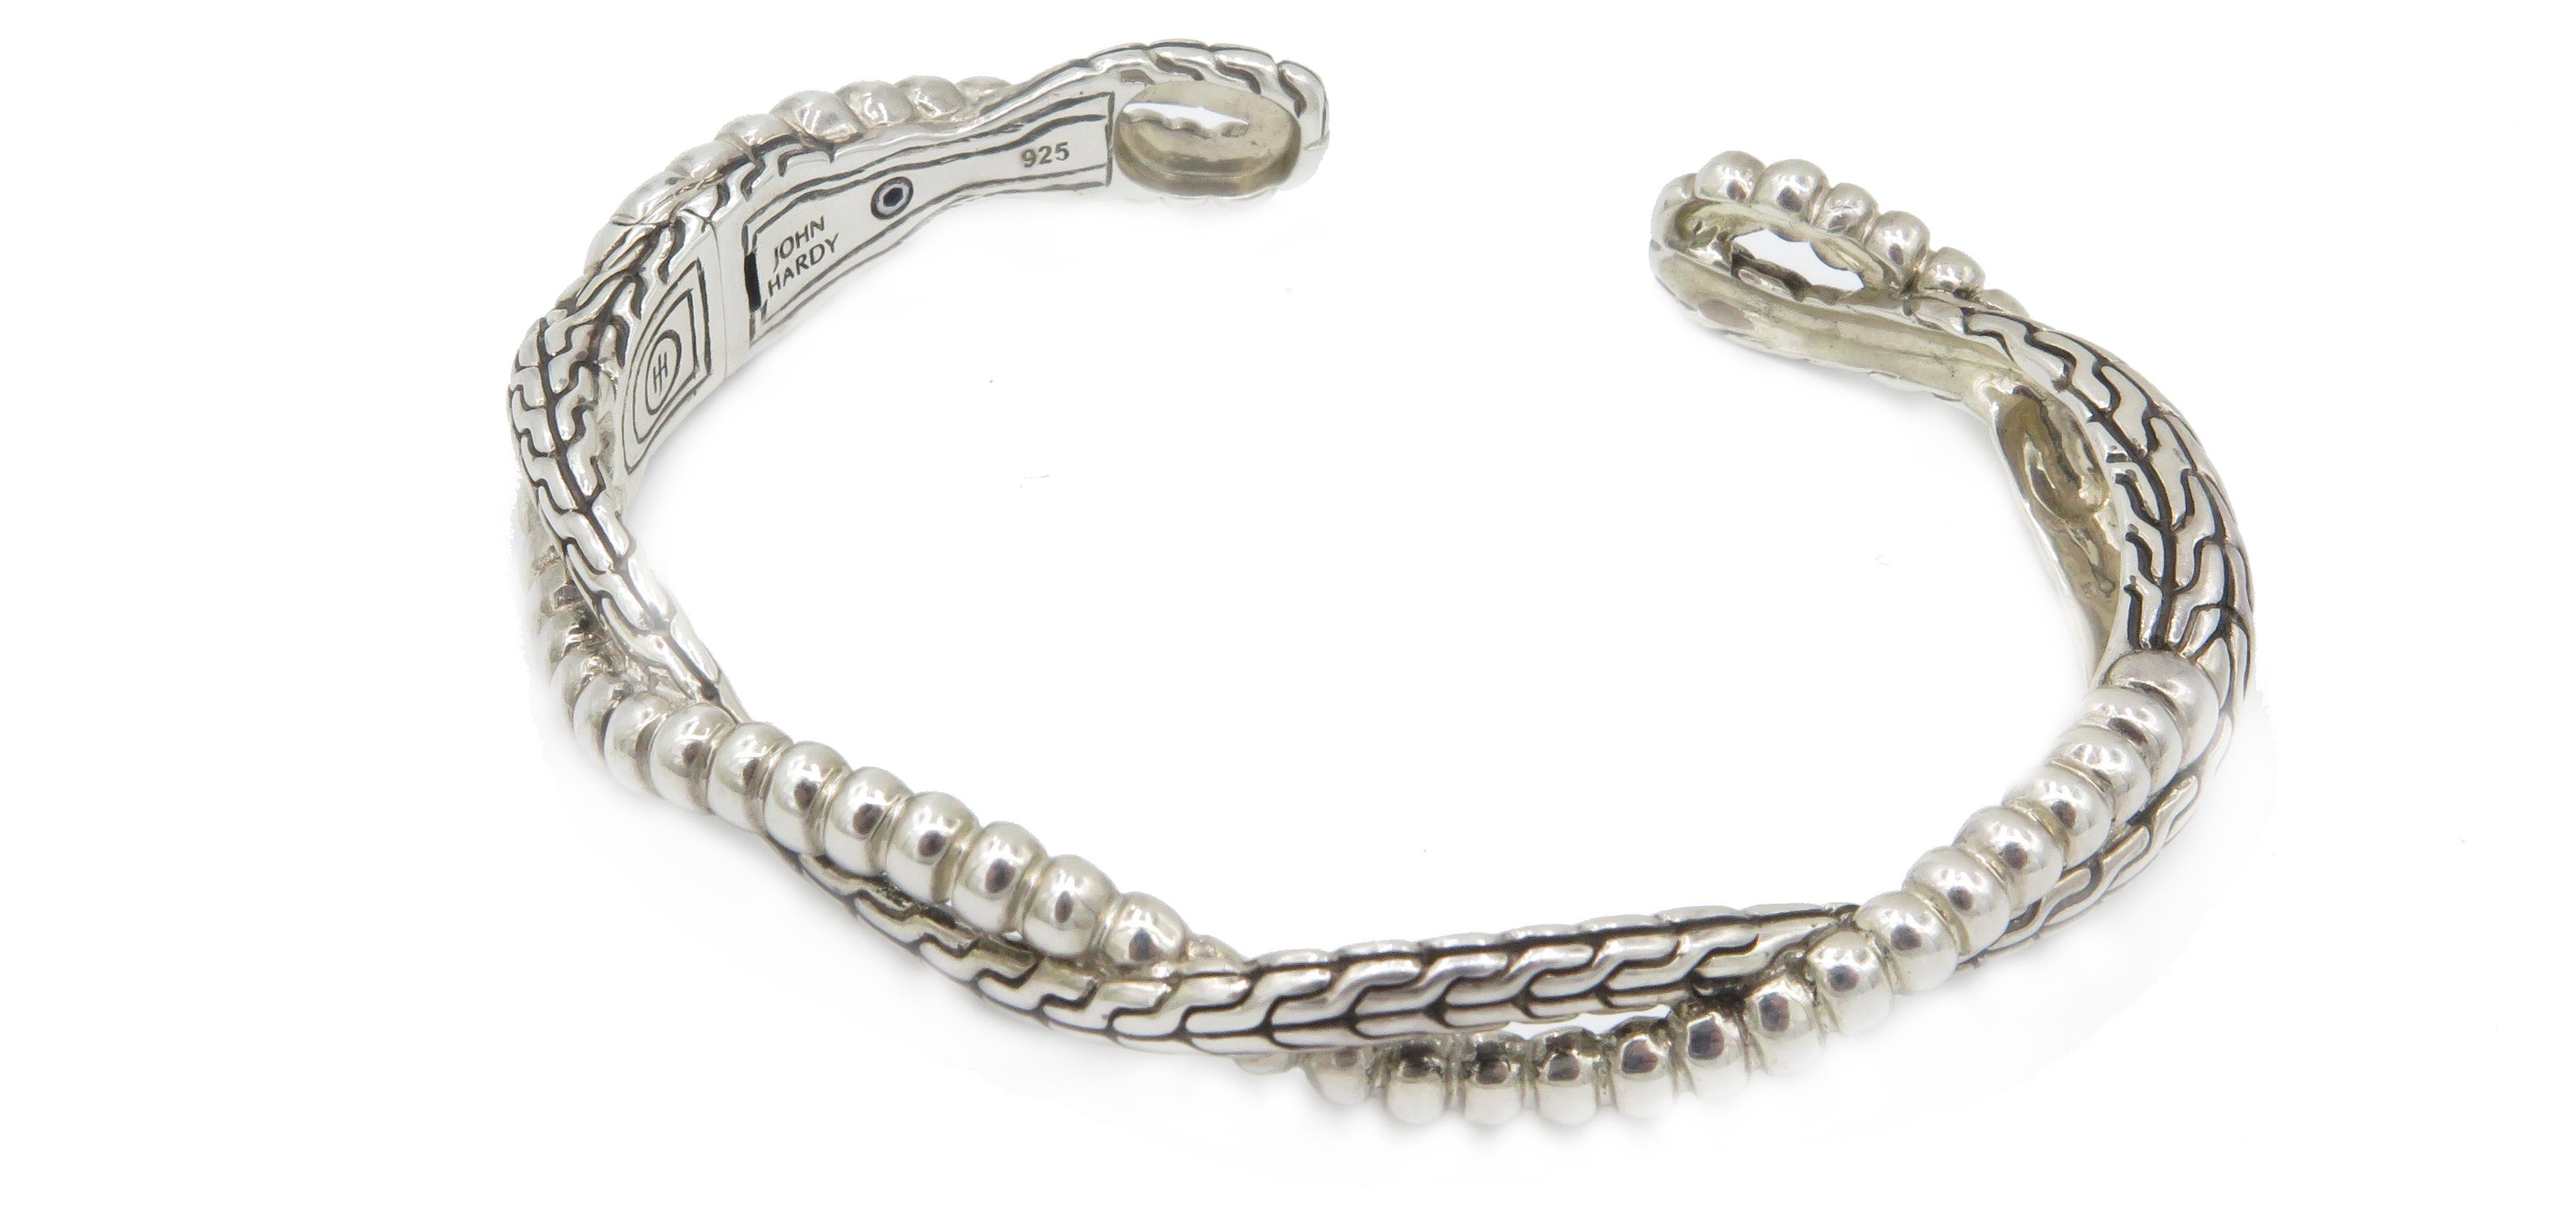 A, beautiful lovely etched crossover design bracelet in 925 sterling silver. This, lovely 7in bracelet is by John Hardy. Who, is widely known for his amazing craftsmanship and silver jewelry. John Hardy's, creative influences comes his natural